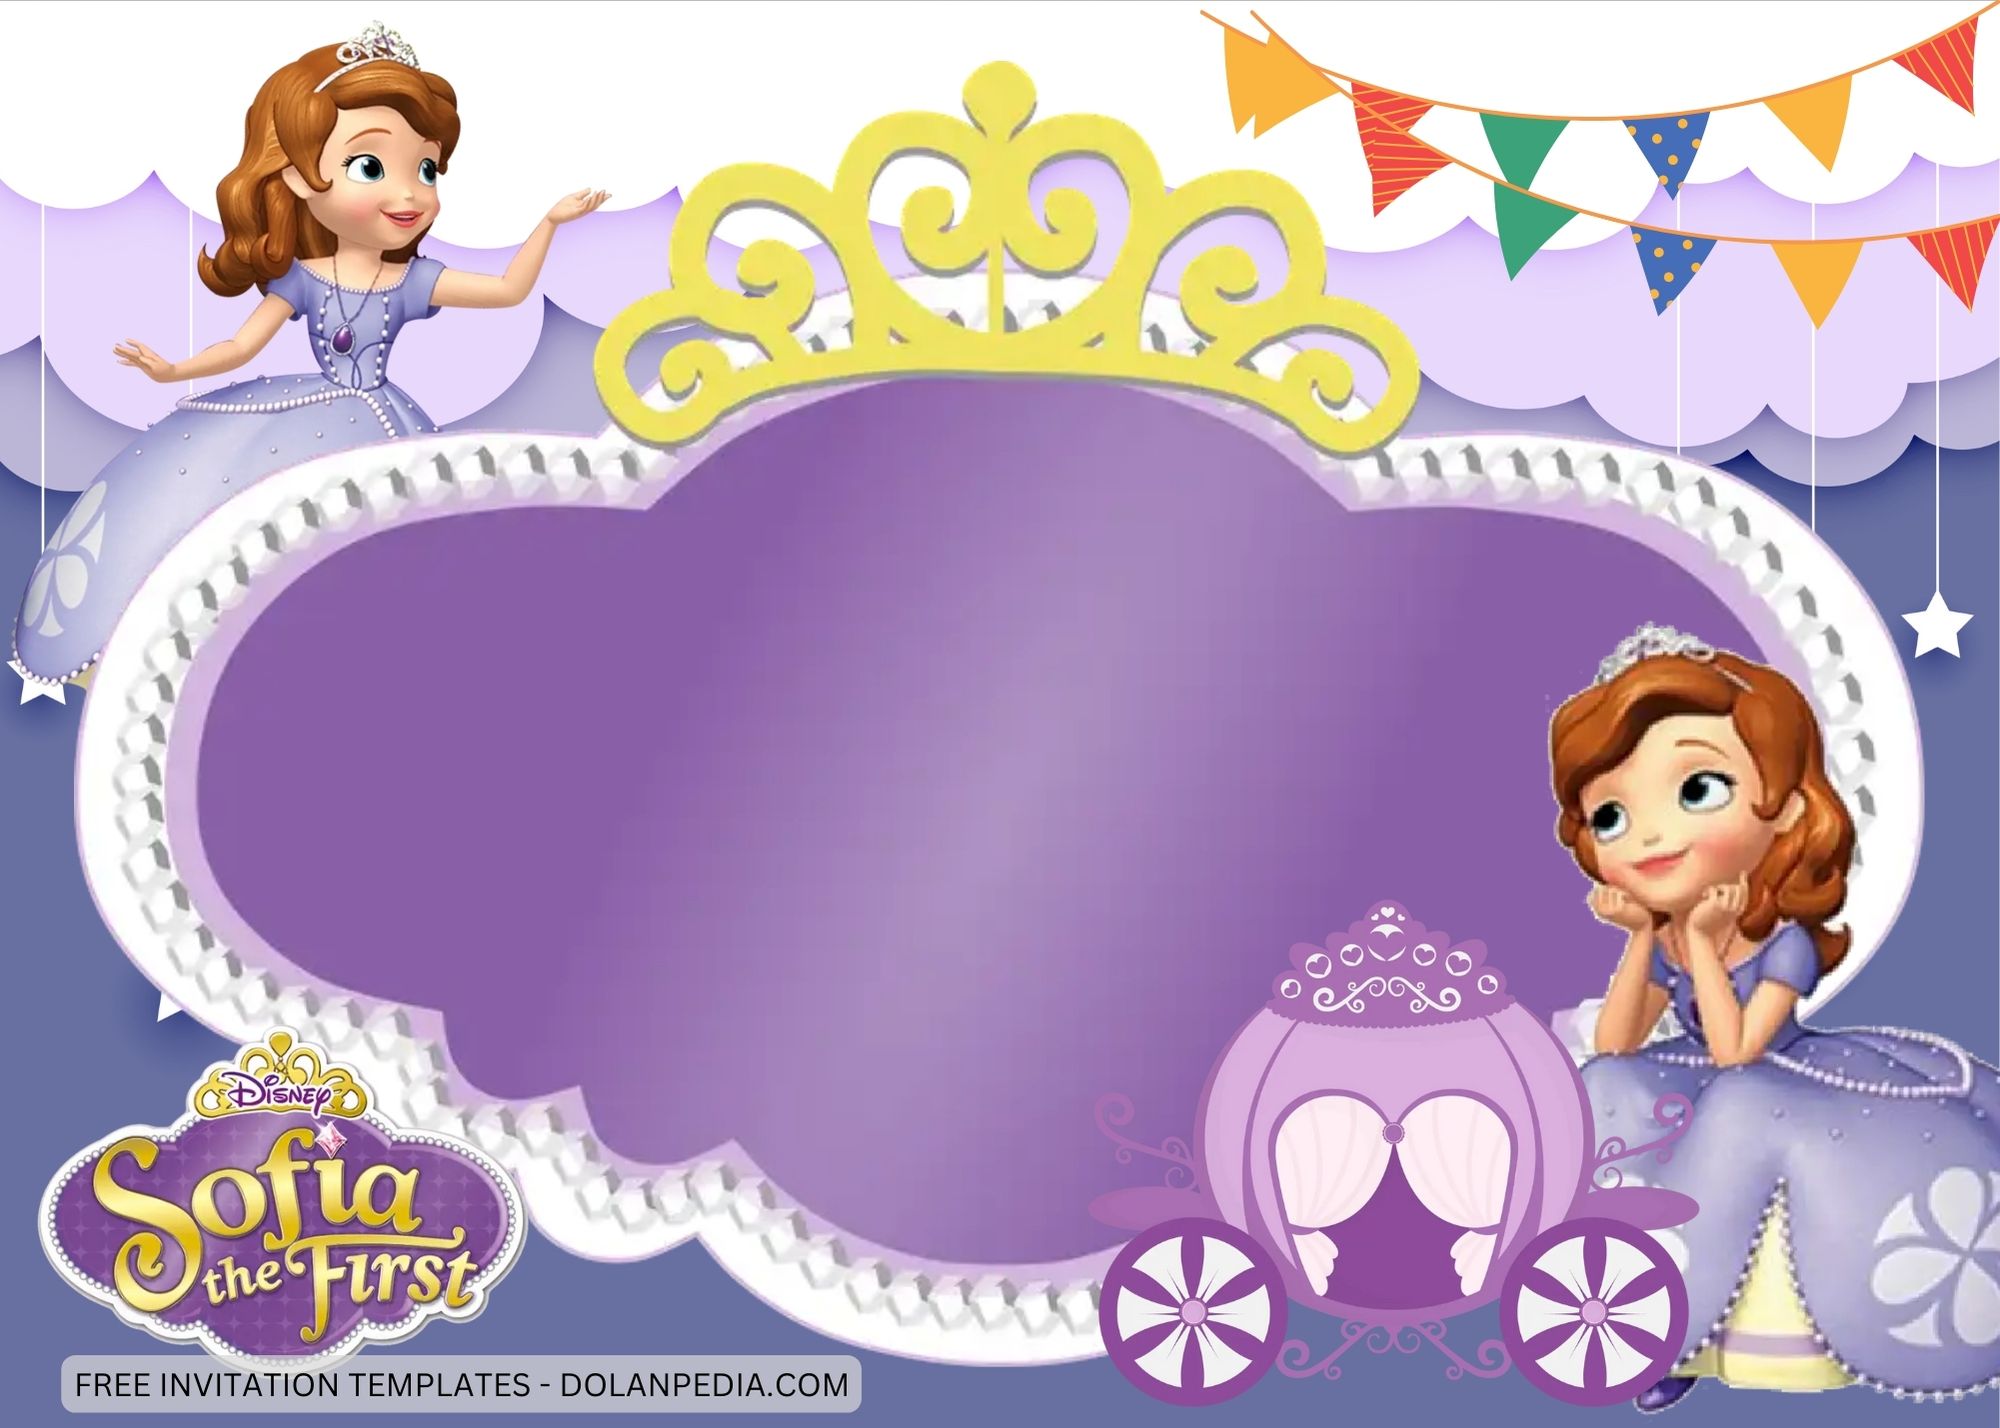 Blank Sofia The First Birthday Invitation Templates Two